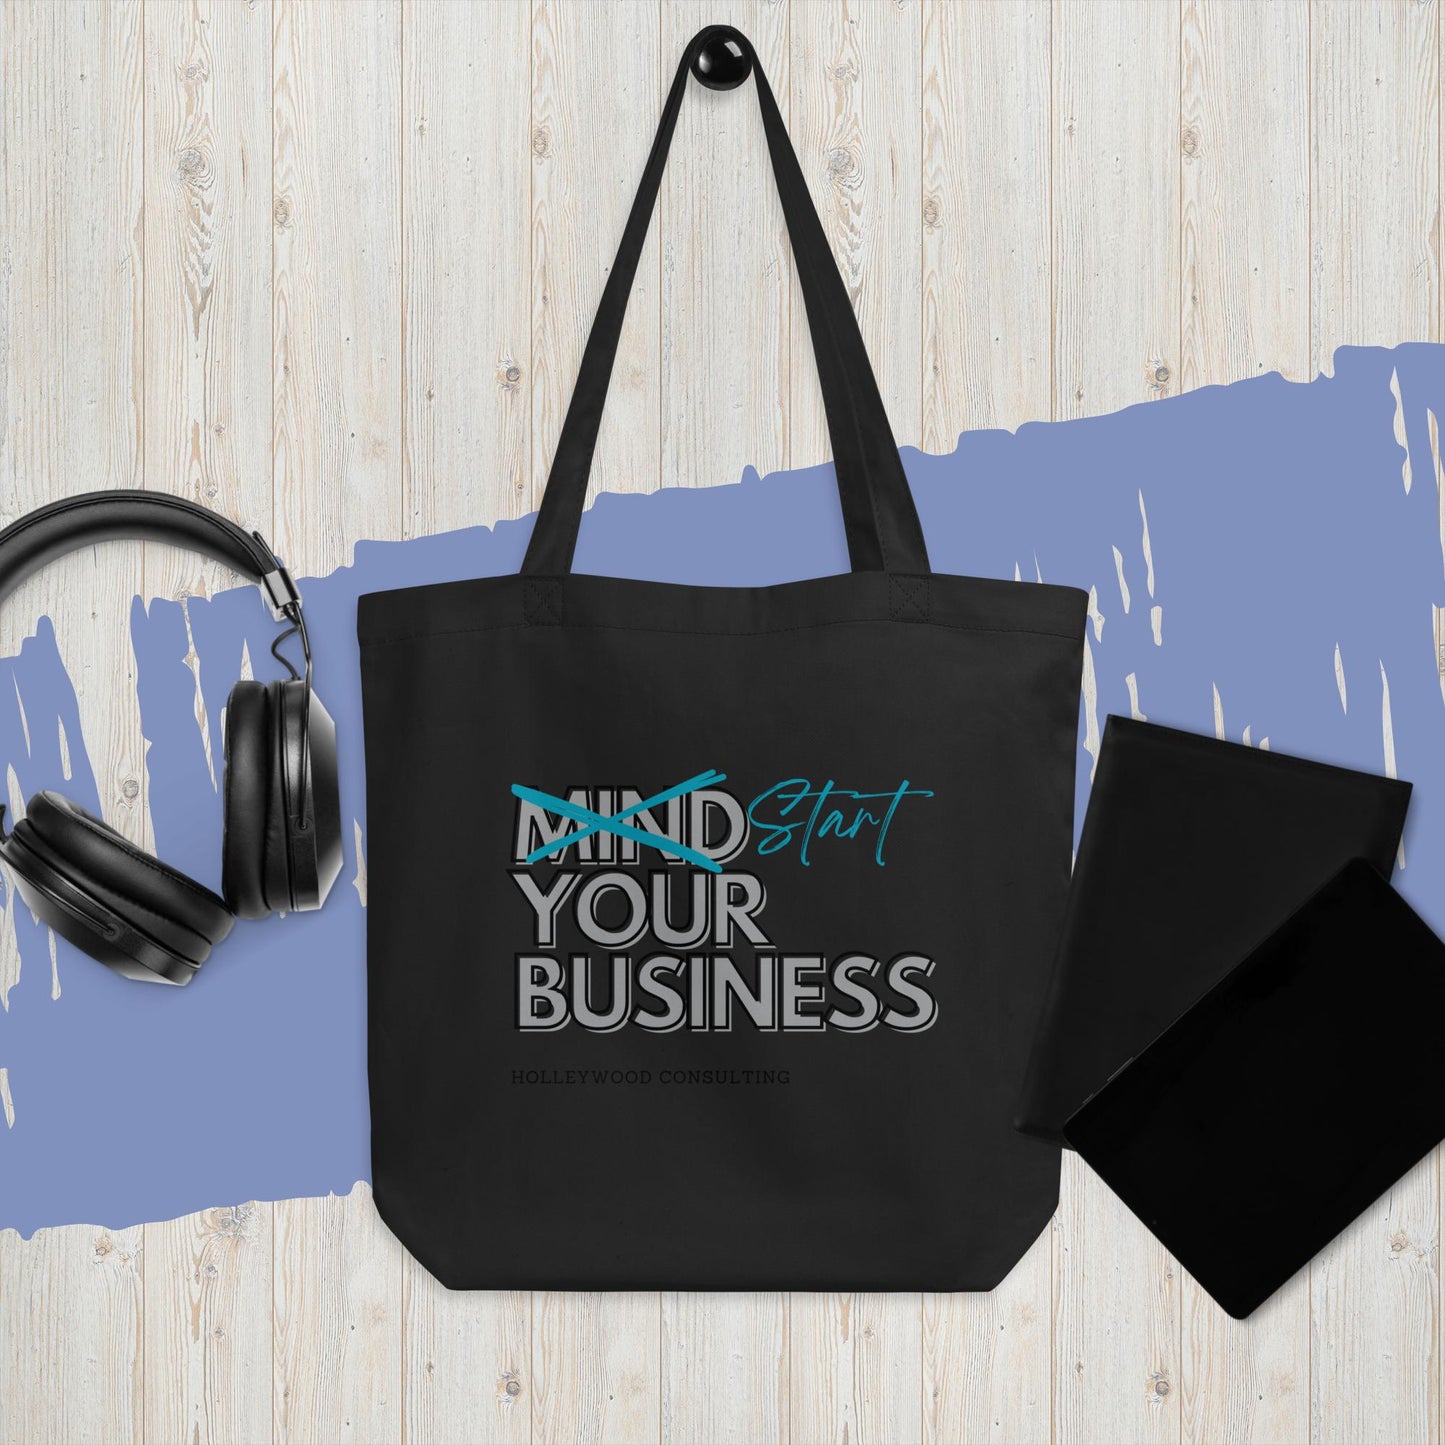 Mind (START) Your Business Tote Bag